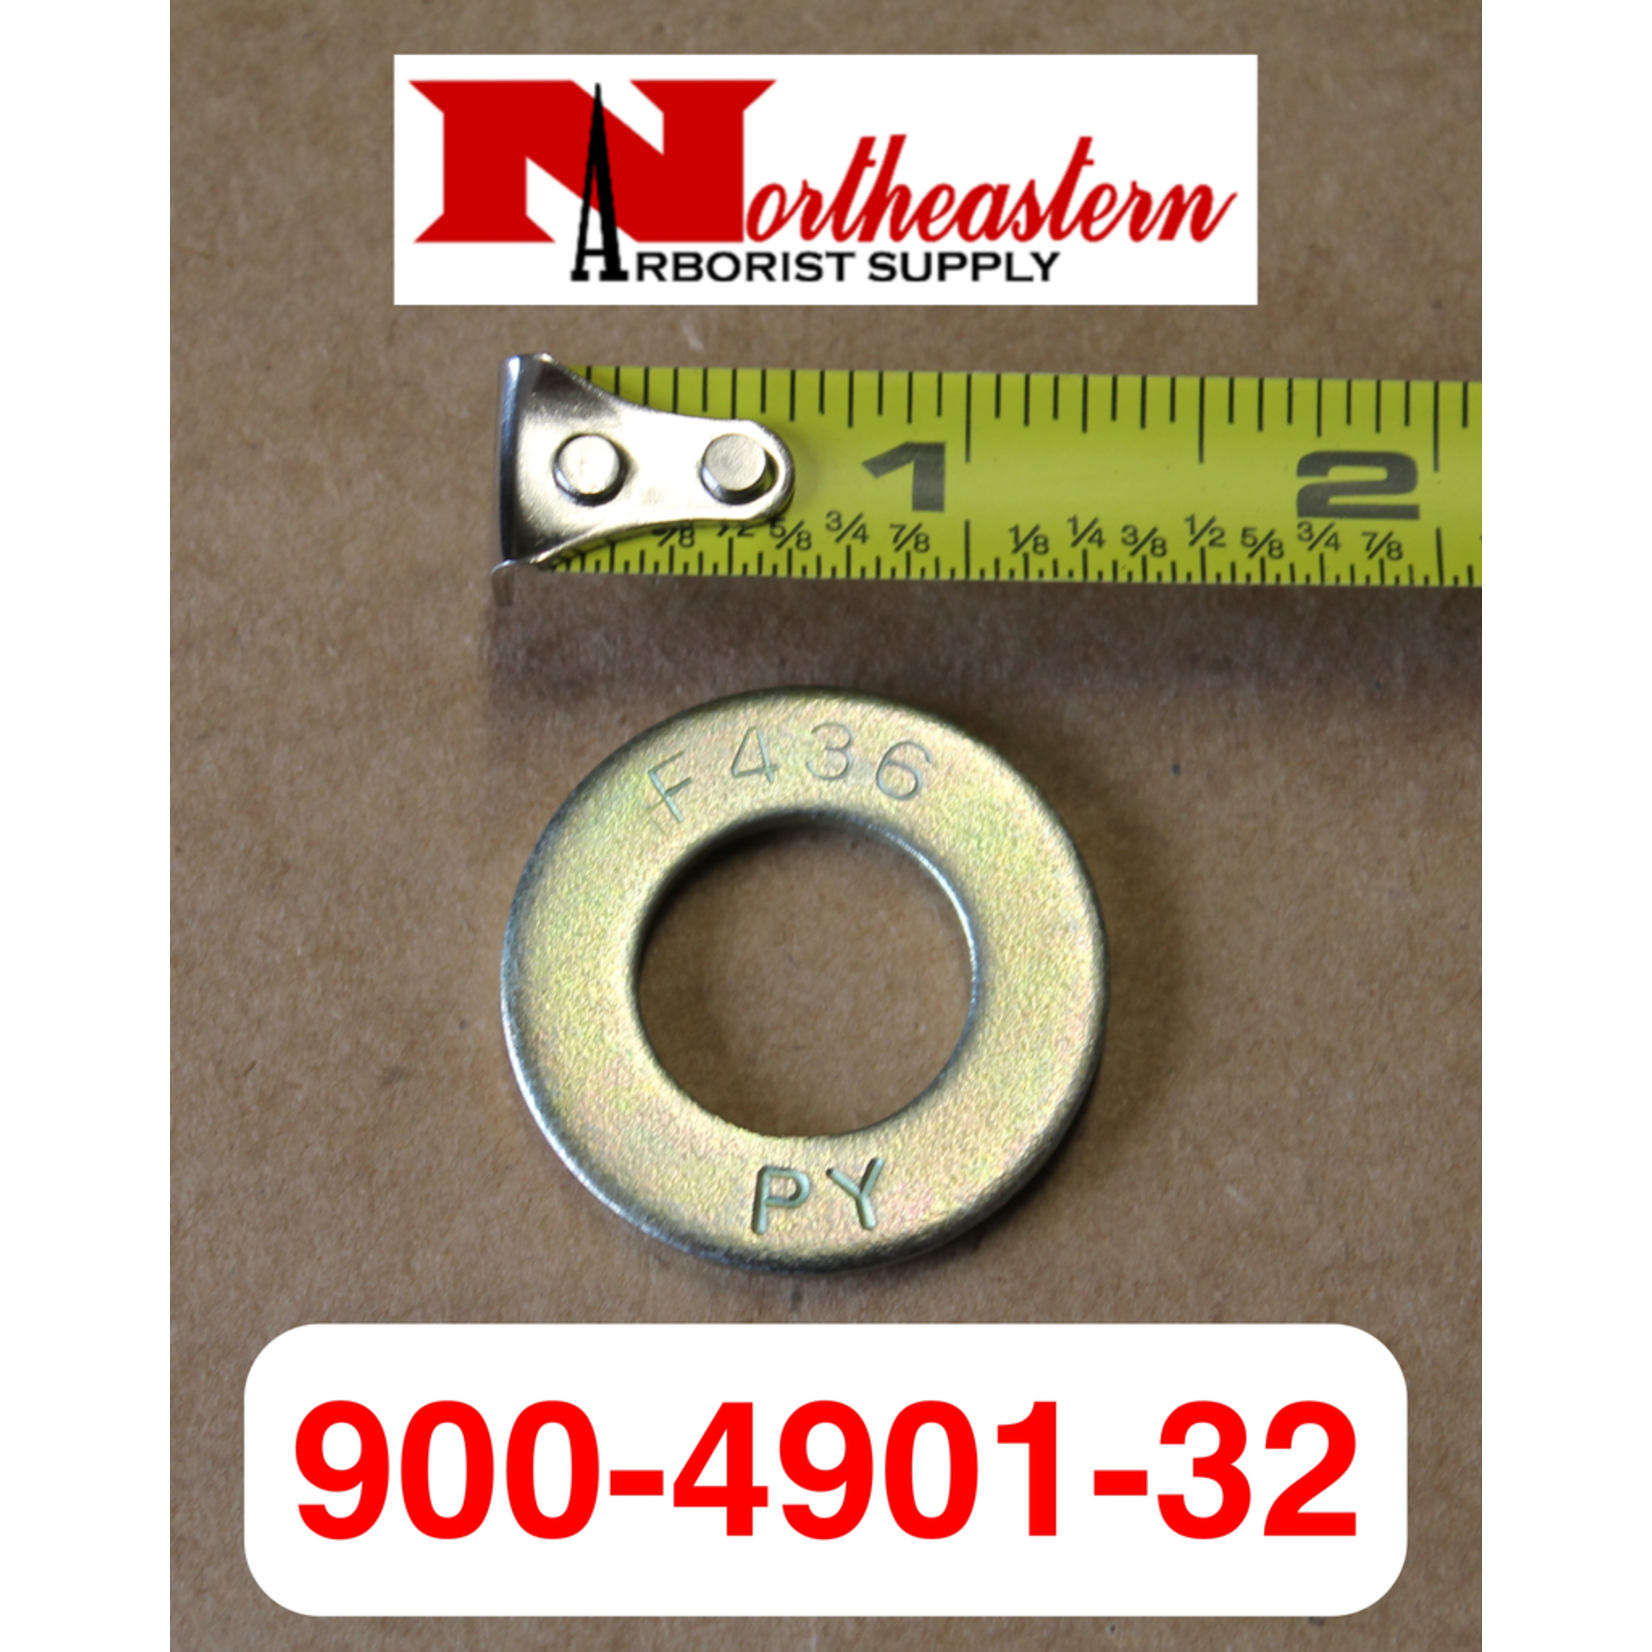 F436 Washer For 5/8 Blade Bolt (Bb1091G) Has Smaller Od And Is Double Thick & Hardened, 900-4901-32